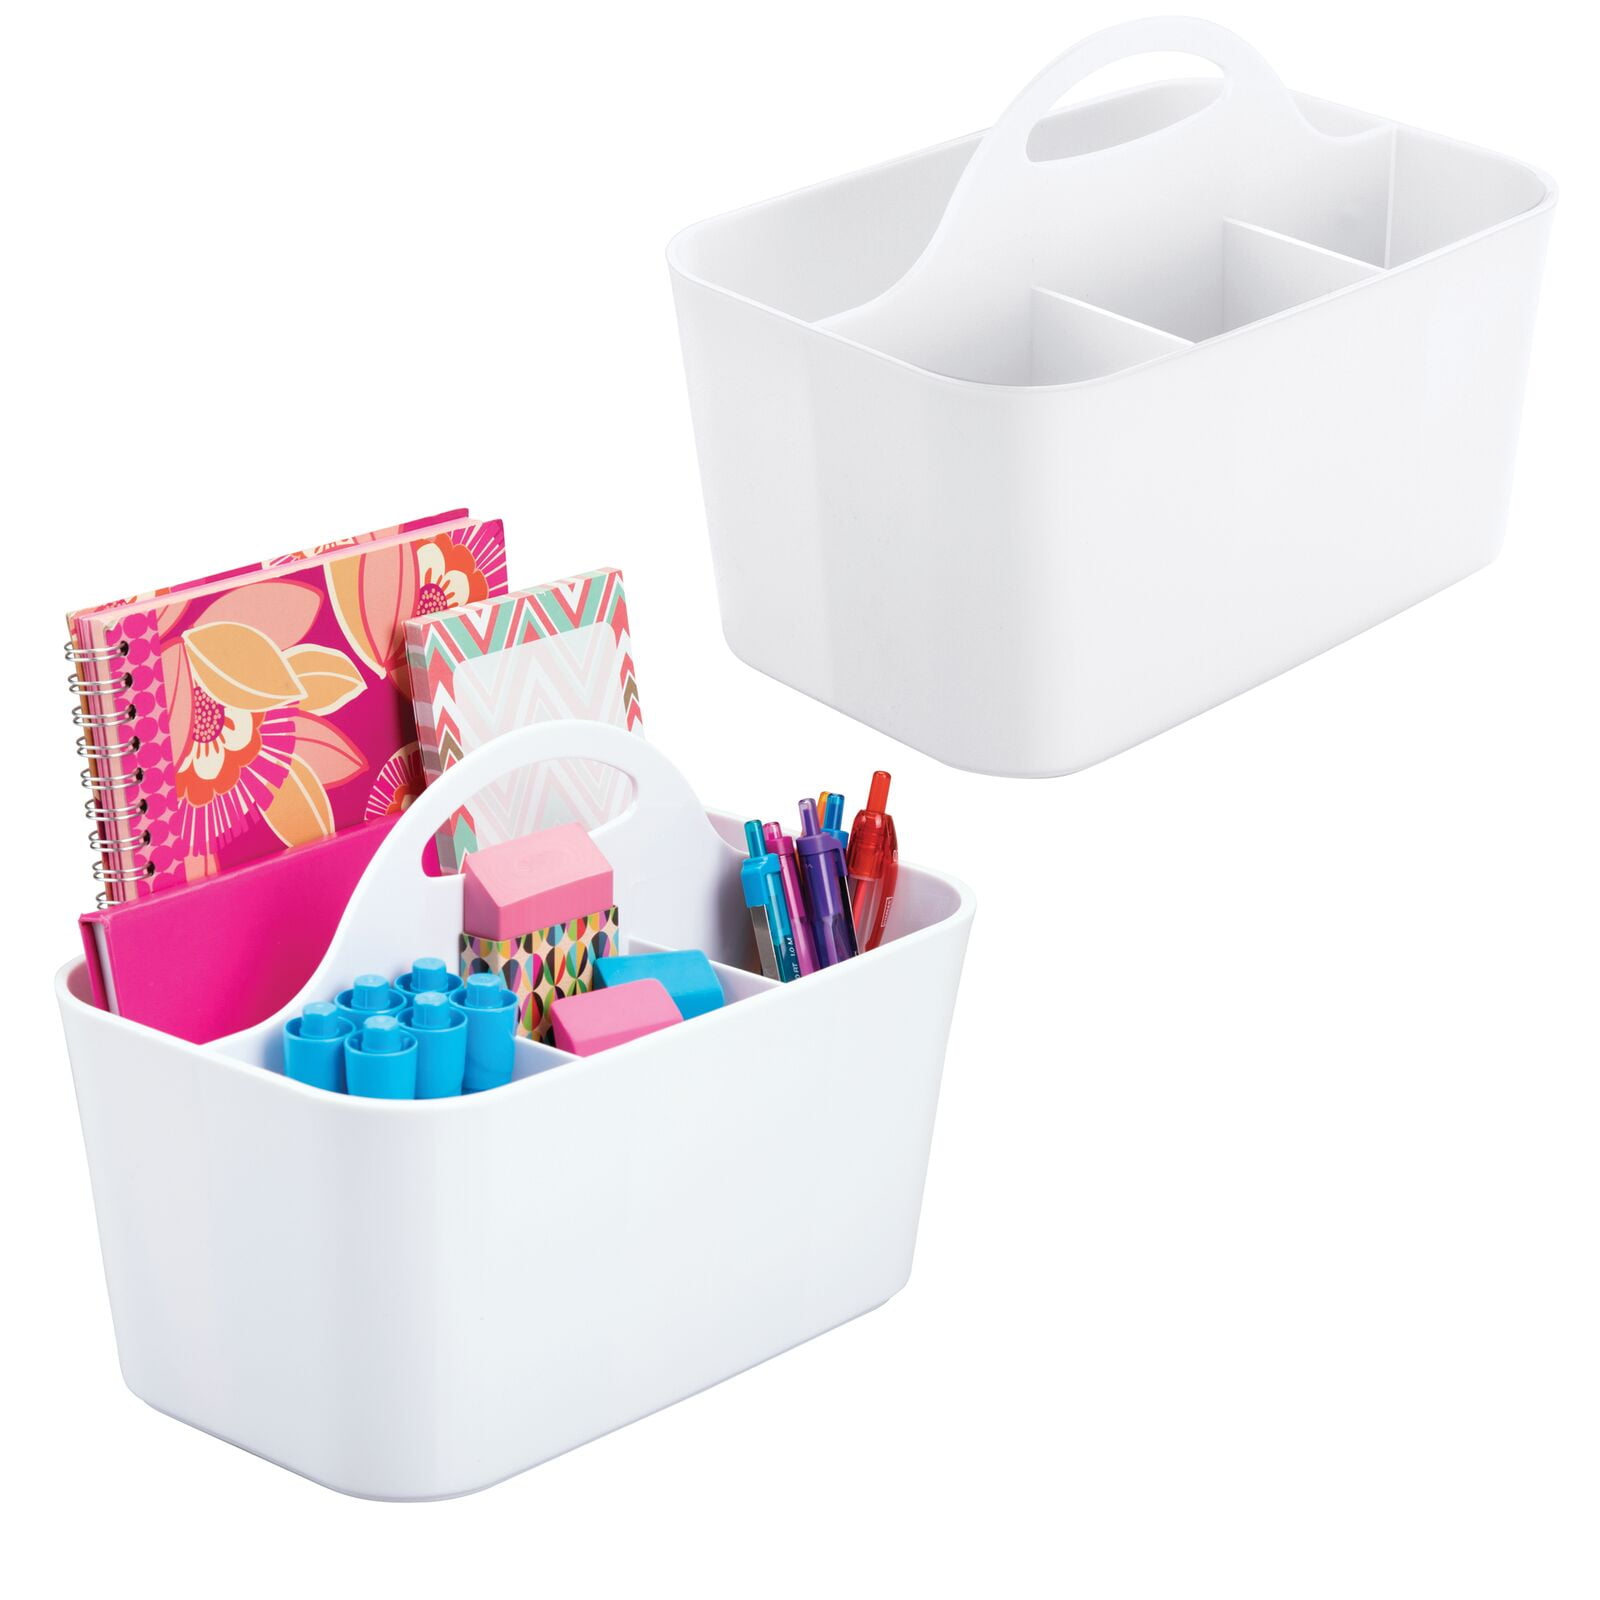  mDesign Plastic Office Storage Organizer Caddy Tote with Handle  for Cabinet, Countertop, Desk, Workspace - Holds Pens, Colored Pencils,  Washi Tape, Notebooks - Lumiere Collection, 4 Pack - Clear : Office Products